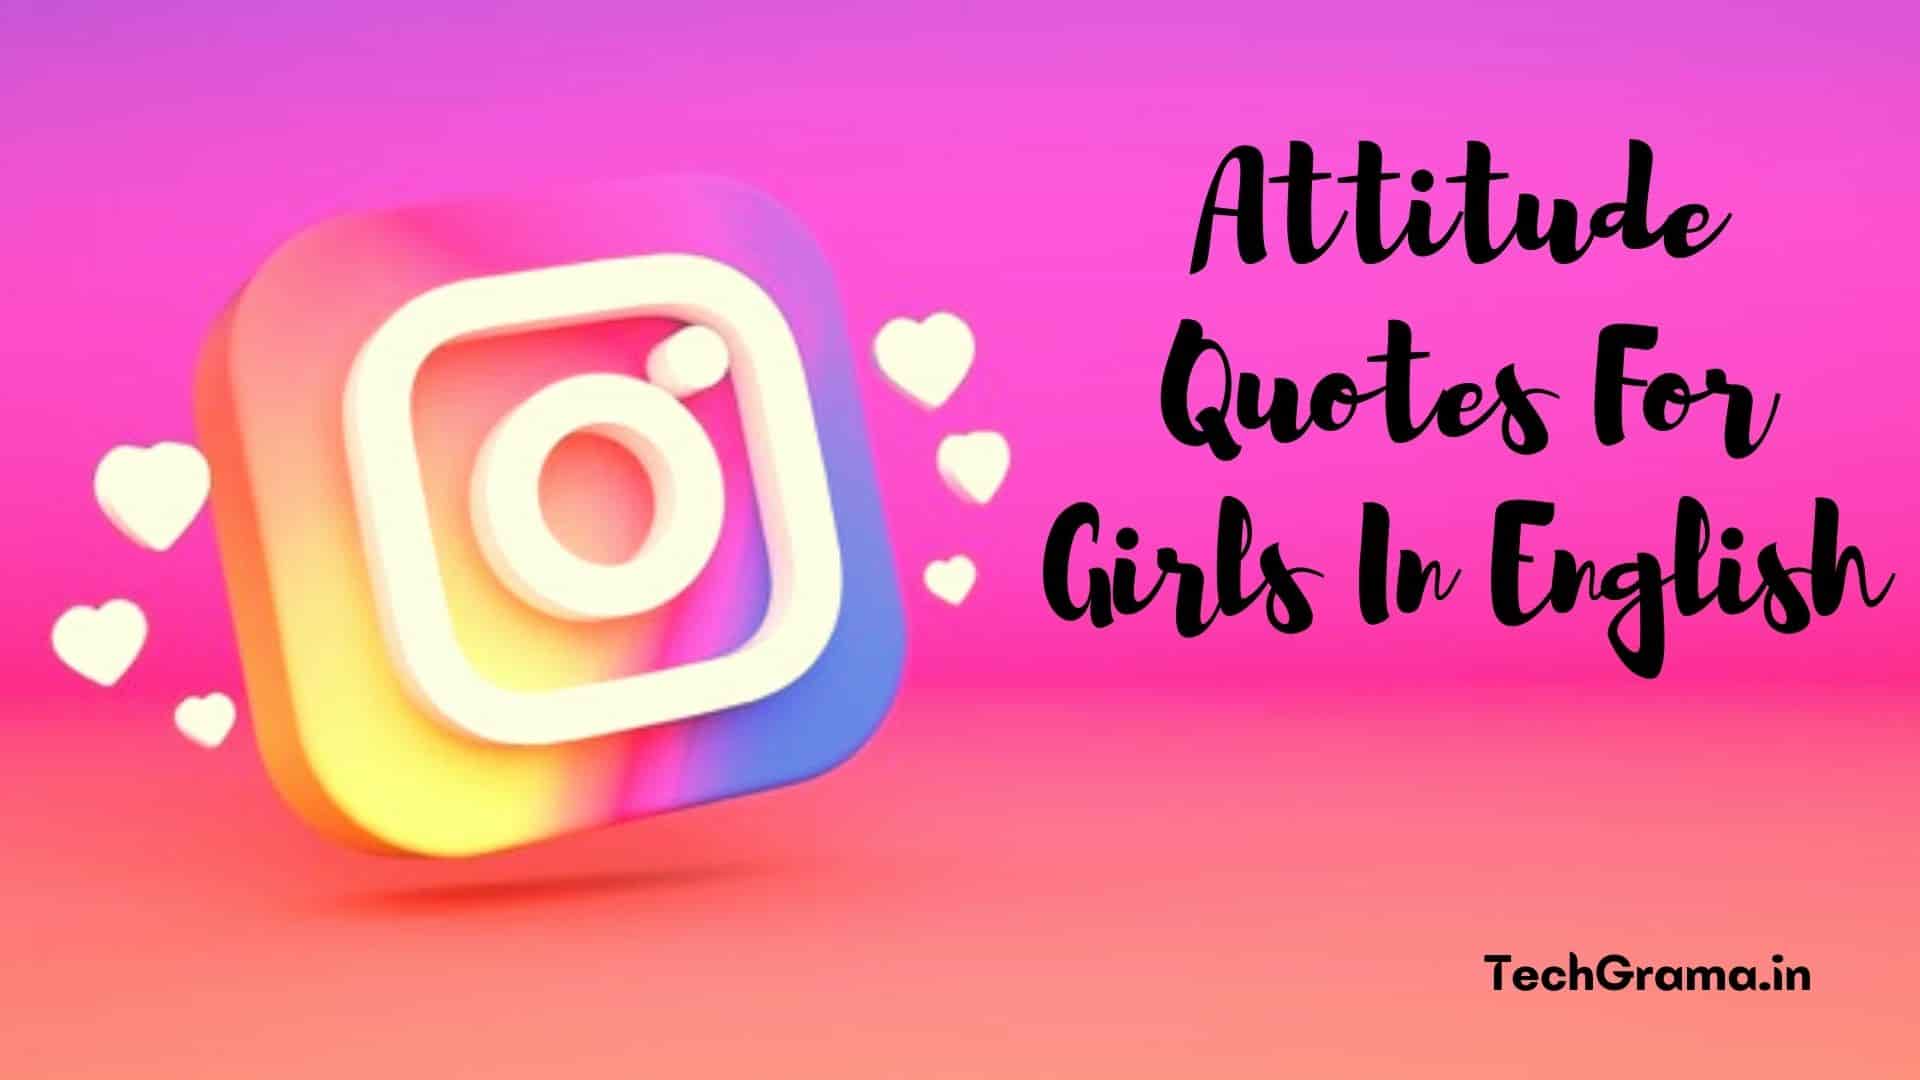 Best Attitude Quotes For Girls For Instagram, Caption For Stylish Girl Attitude, Beauty Girl Attitude Quotes, Savage Girl Attitude Quotes, Best Girl Attitude Quotes, Killer Attitude Quotes For Girls, Attitude Quotes For Girls, Killer Attitude Quotes For Instagram, Attitude Quotes For Girls in English, Single Girl Attitude Quotes, Short Attitude Quotes For Girls.